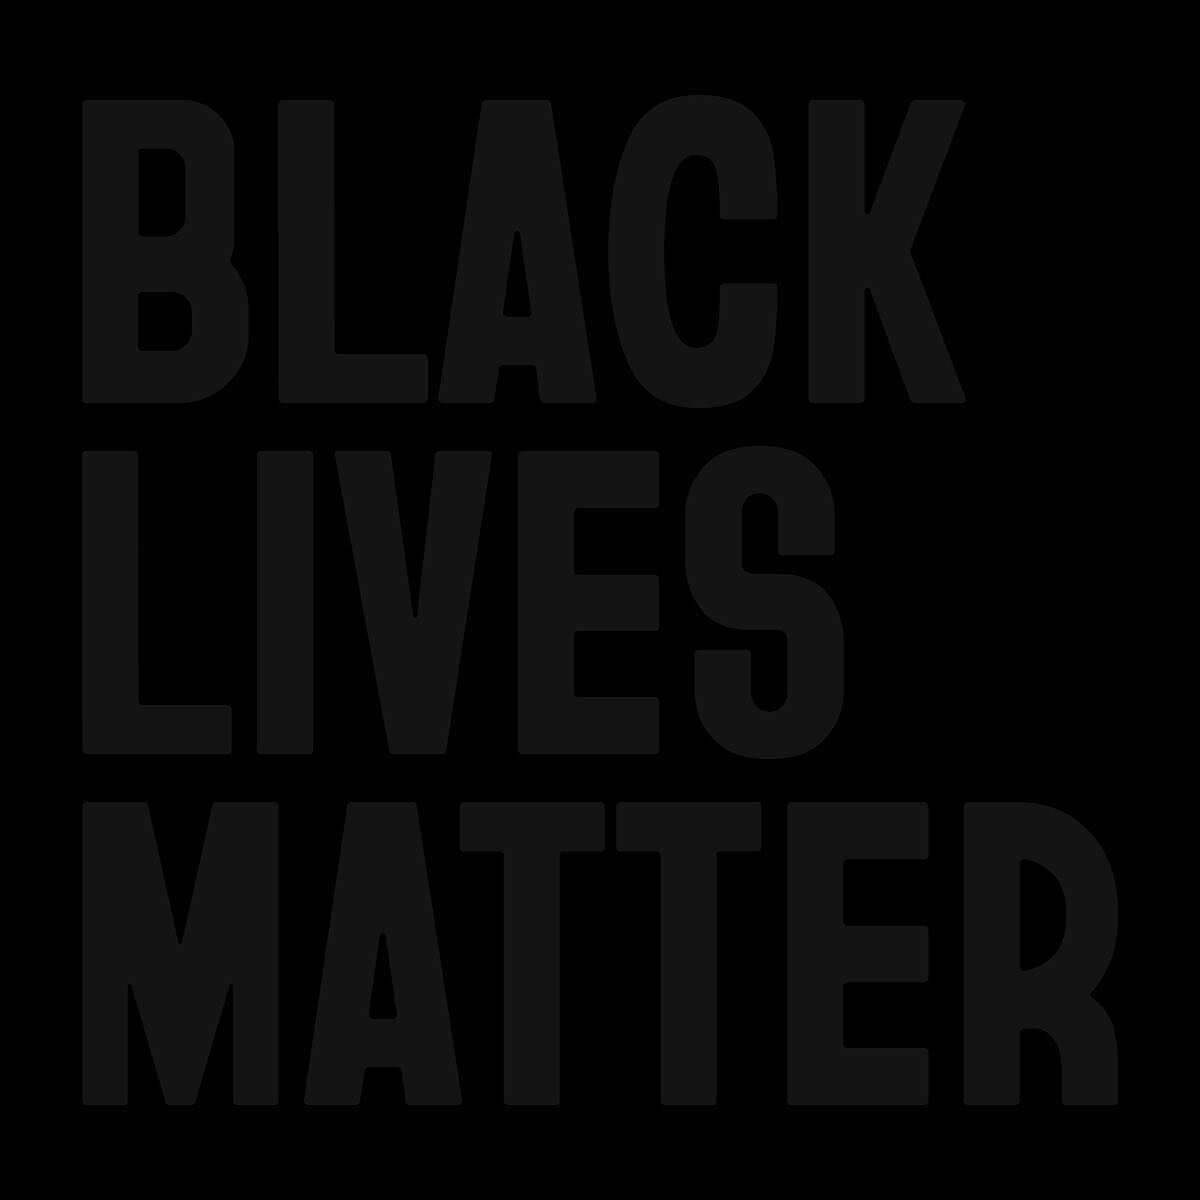 black lives matter. 
start the education process. listen. read books by black authors. sign petitions. demilitarize the police. get involved. donate @campaignzero @unicorn.riot @blklivesmatter @minnesotafreedomfund @blackvisionscollective @reclaimthe